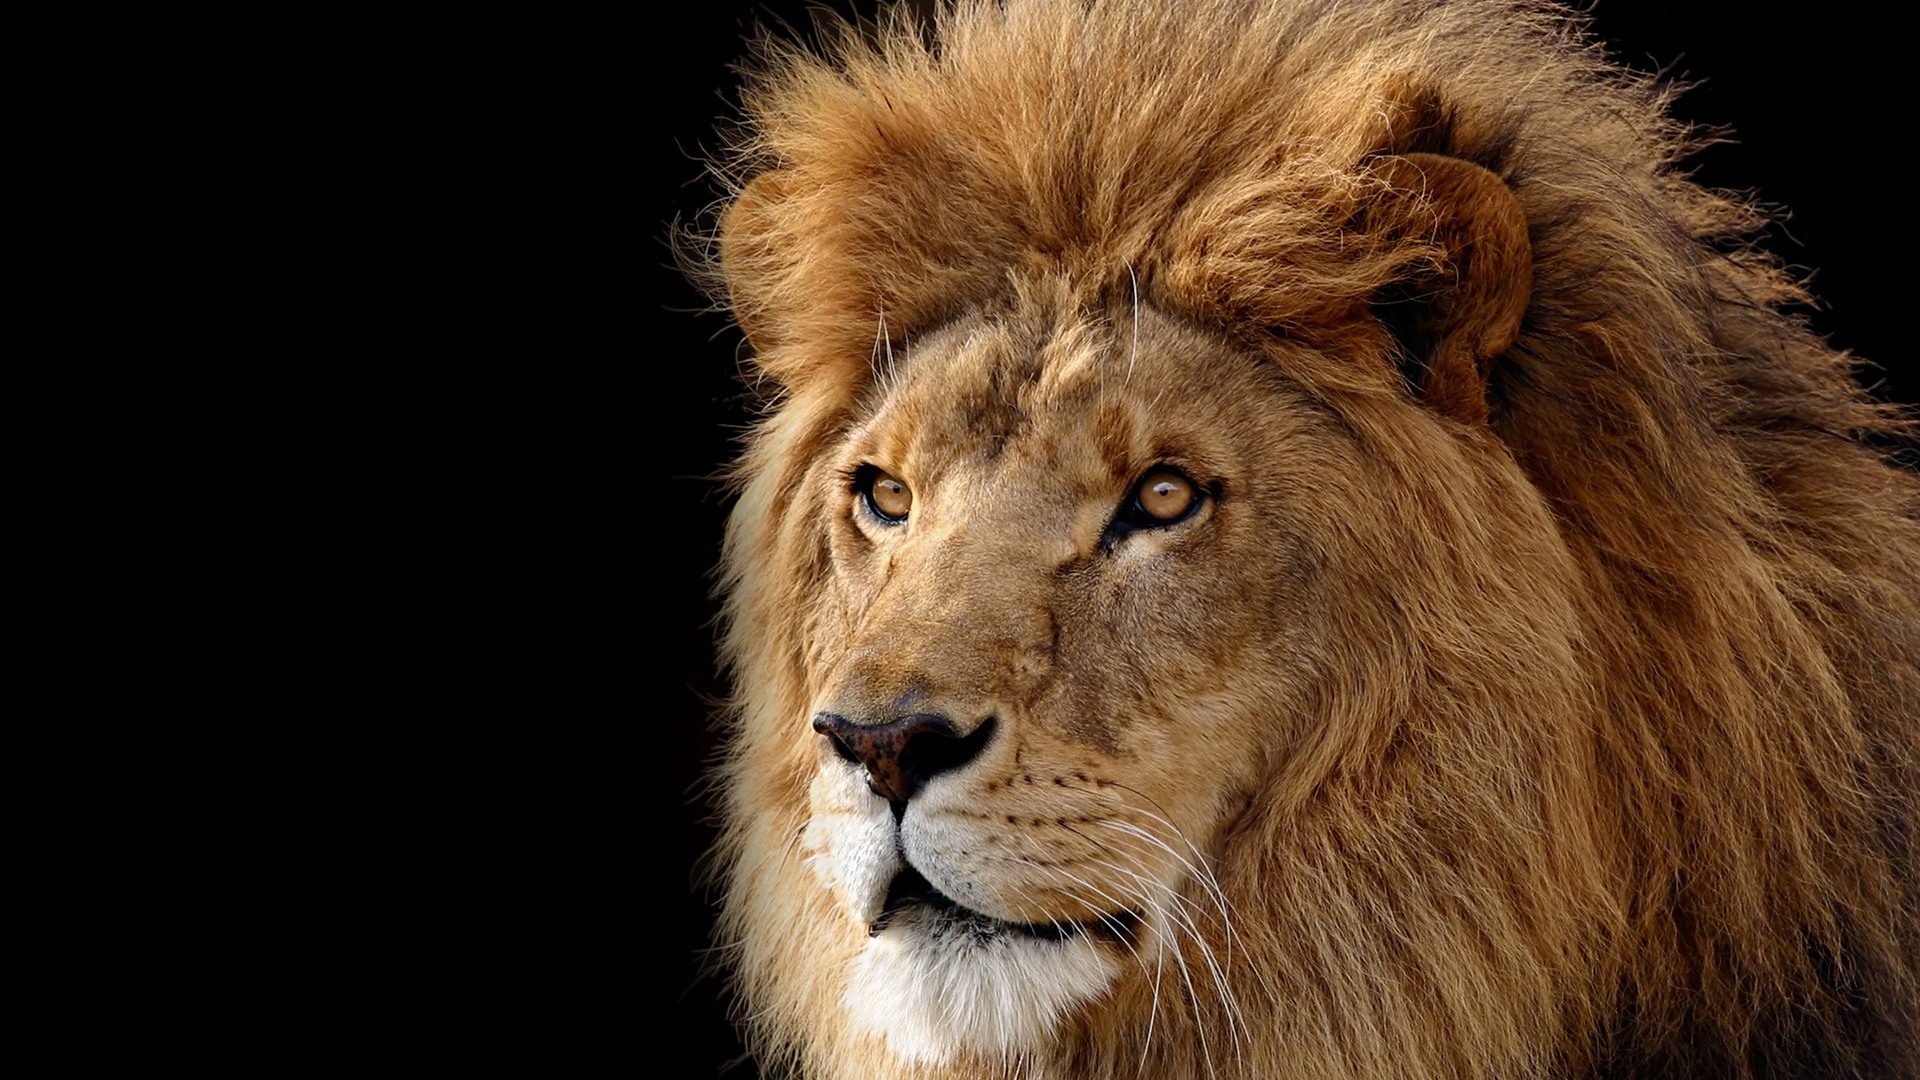 Mac OS X the Lion Apple systems official HD wallpapers #14 - 1920x1080